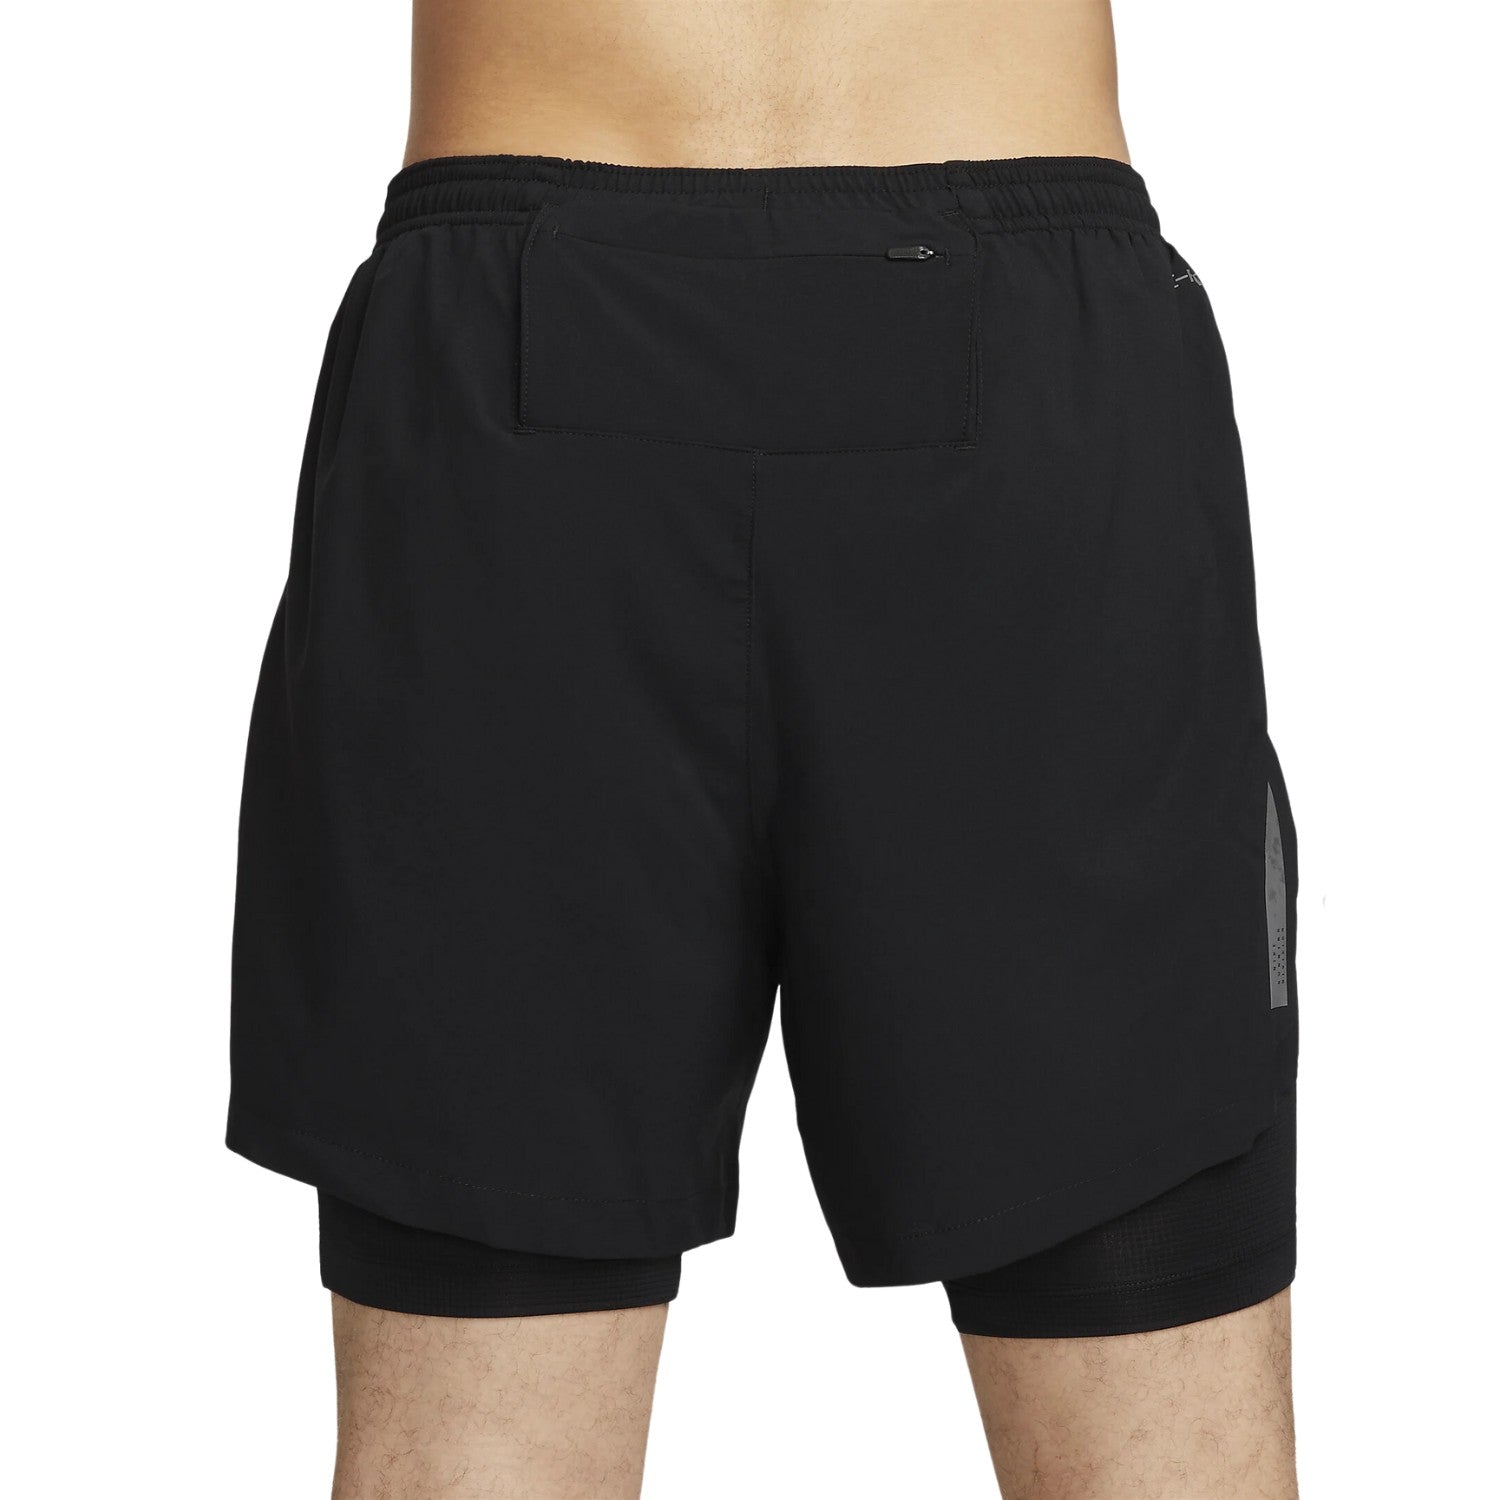 Nike Dri-fit Run Division Stride 8" Running Shorts Mens Style : Dx0841